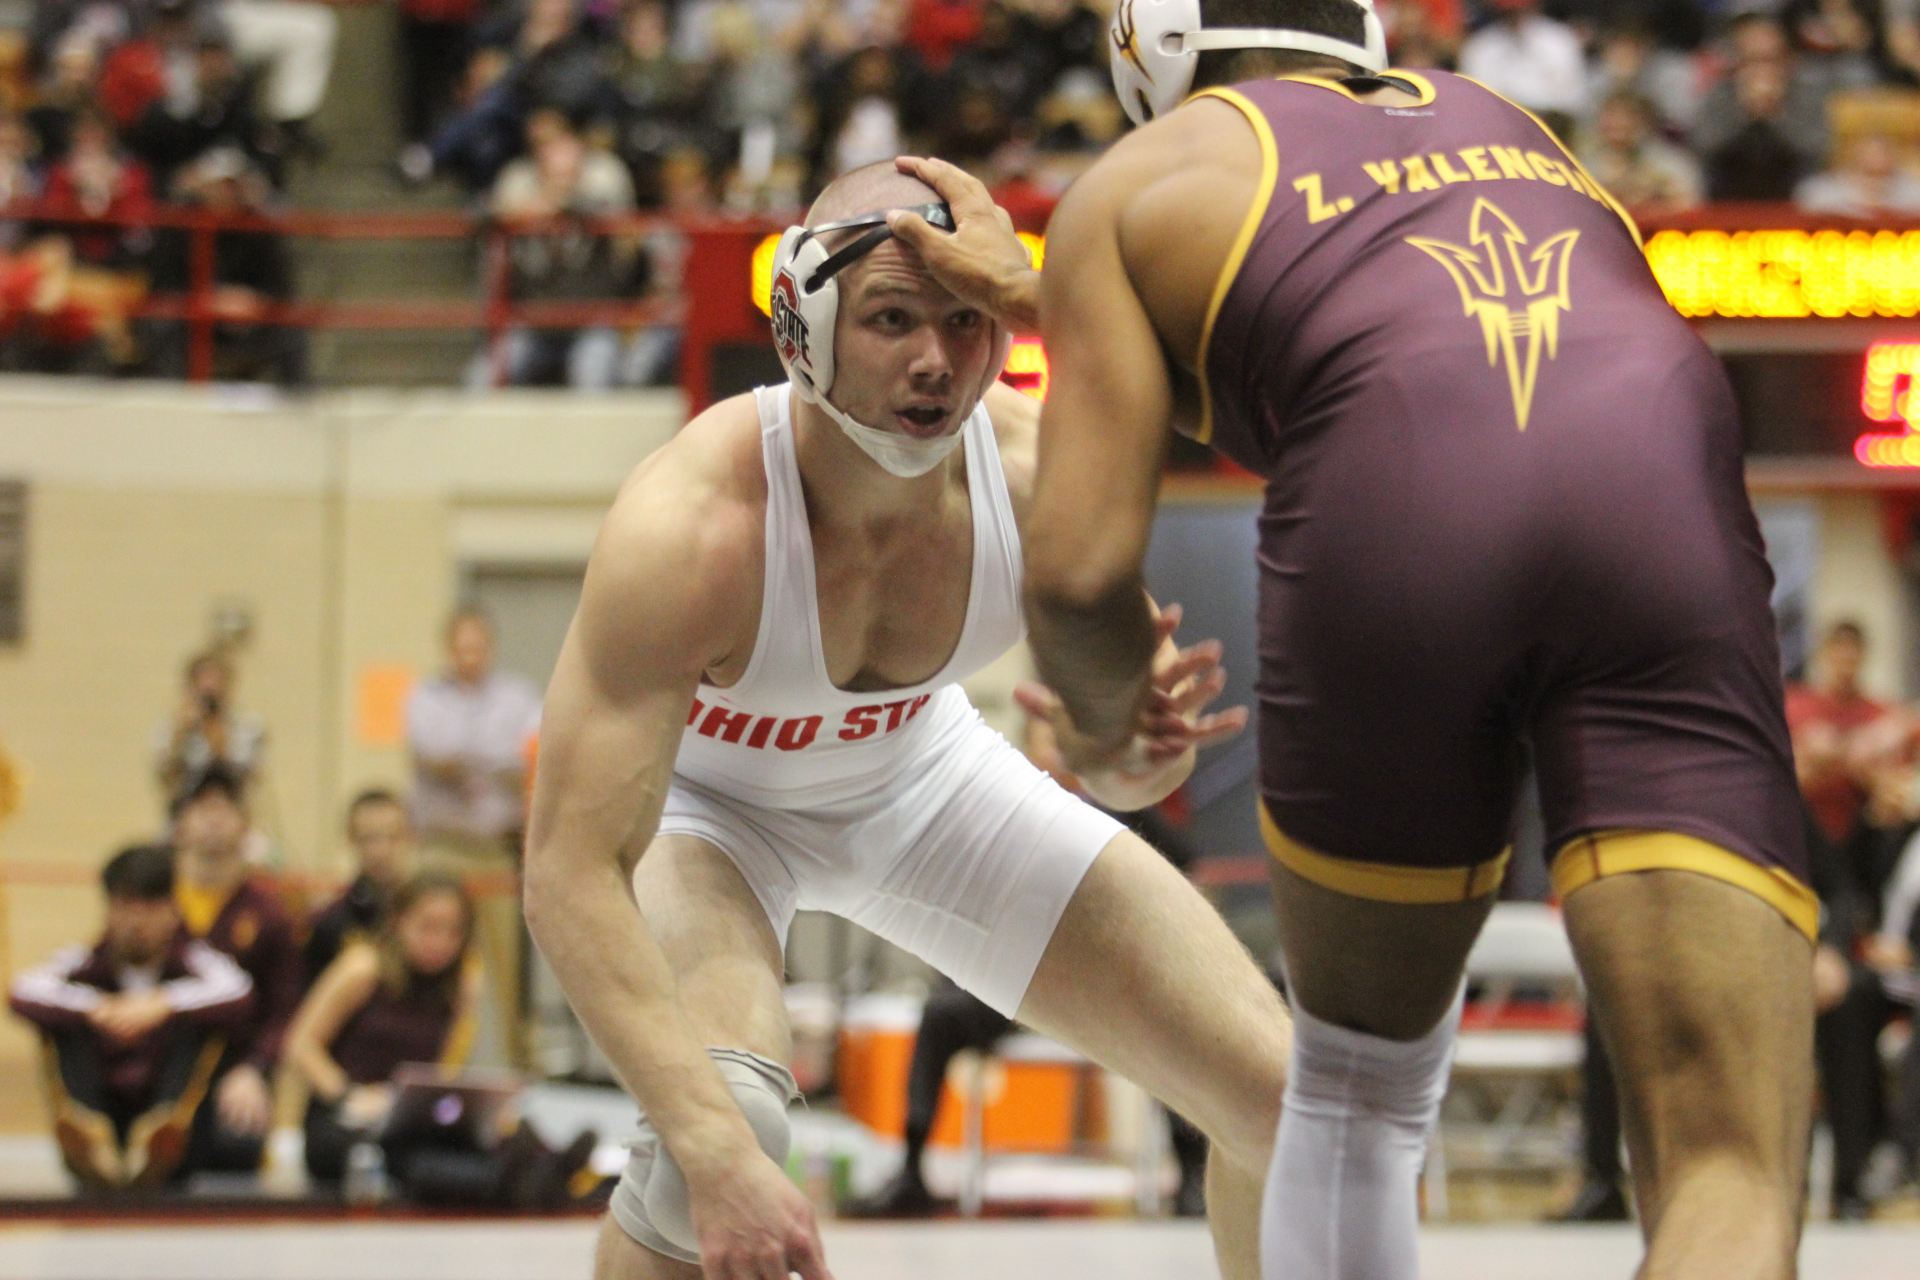 Wrestling: Ohio State defeats Arizona State 31-12 in home-opening dual meet | The Lantern